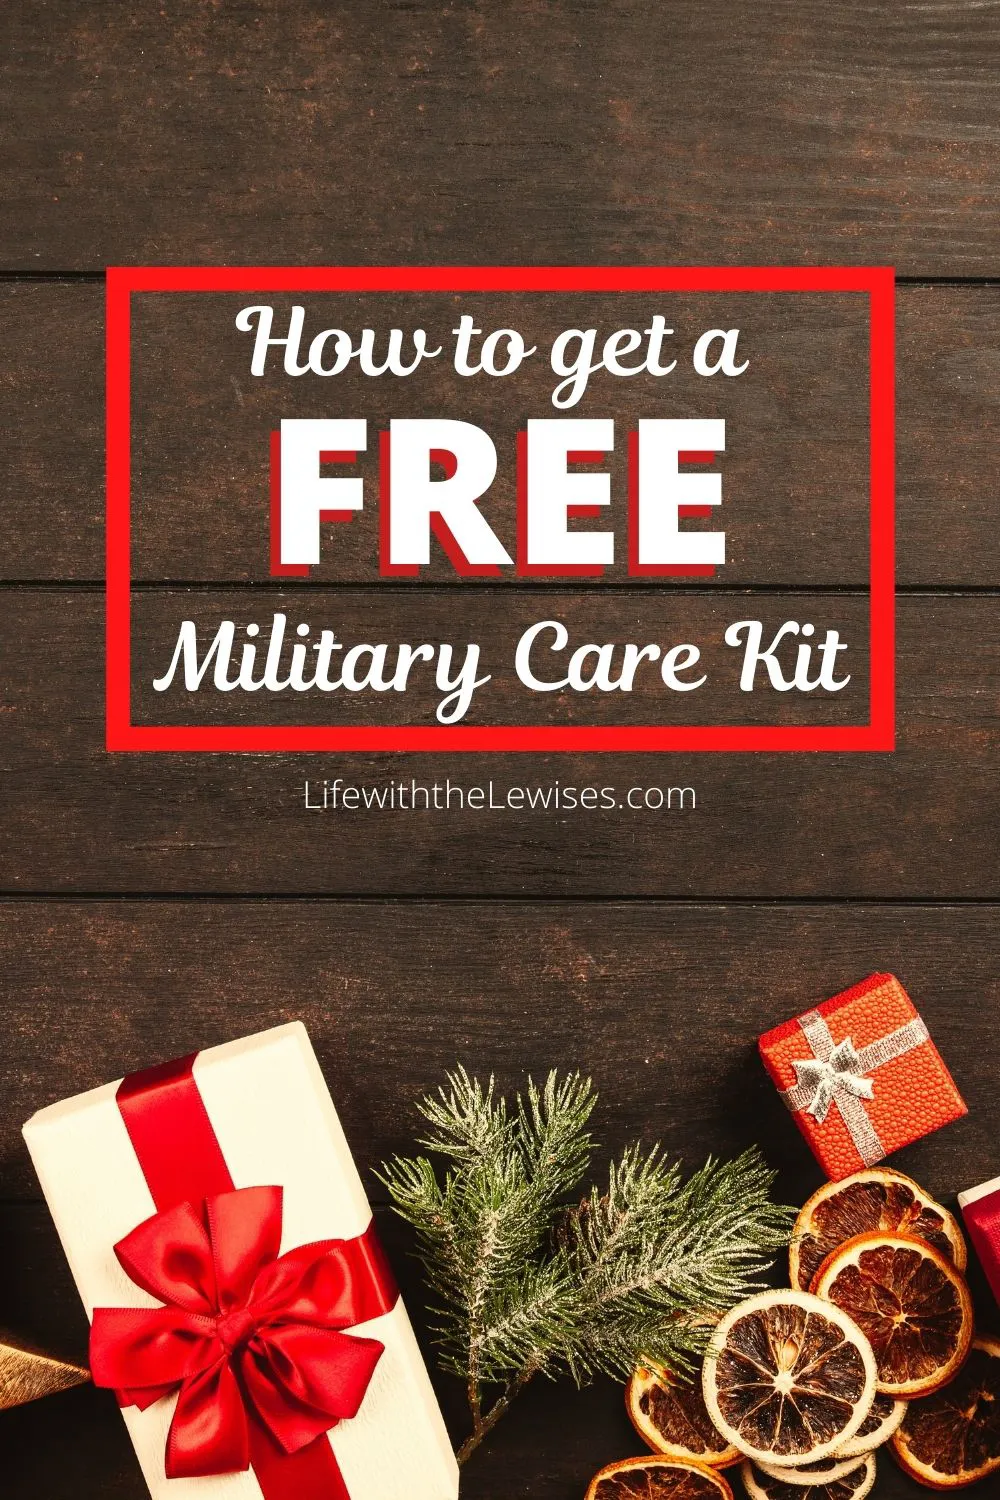 Looking for a way to save money on sending military care packages? Keep reading to find out how to get a USPS Military Care Kit for FREE!